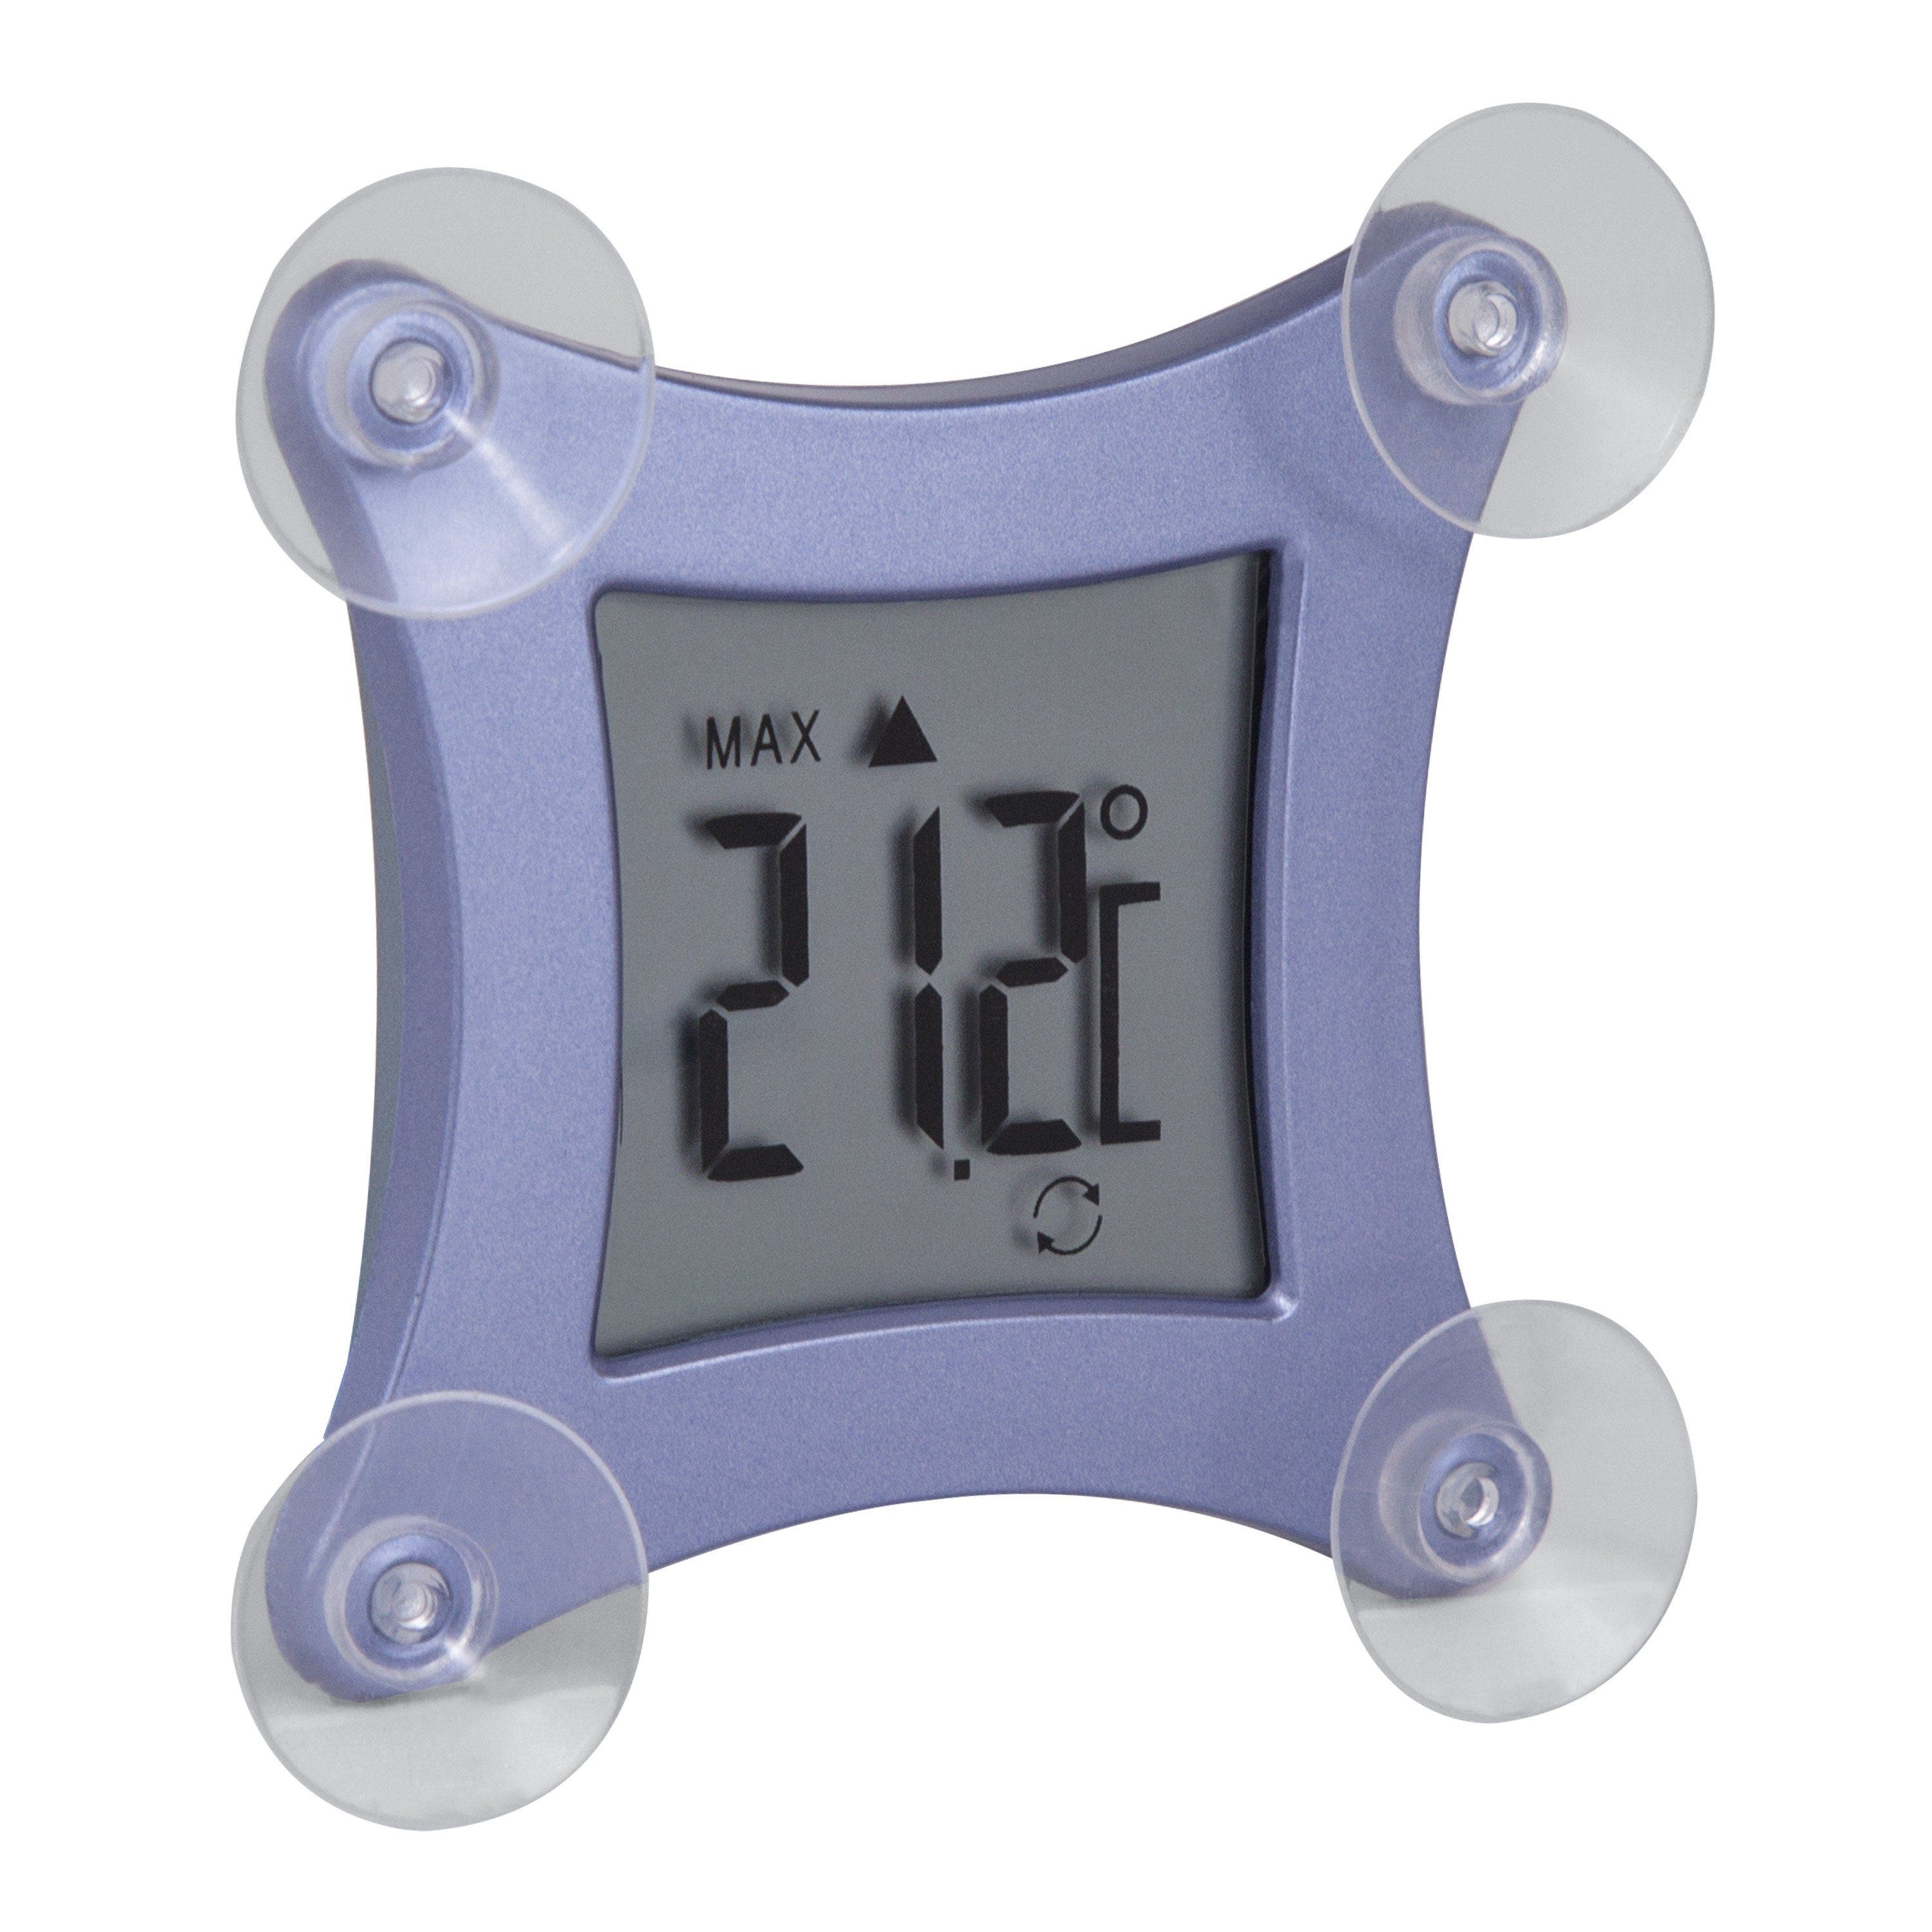 gearonic 3.2'' Clock Thermometer